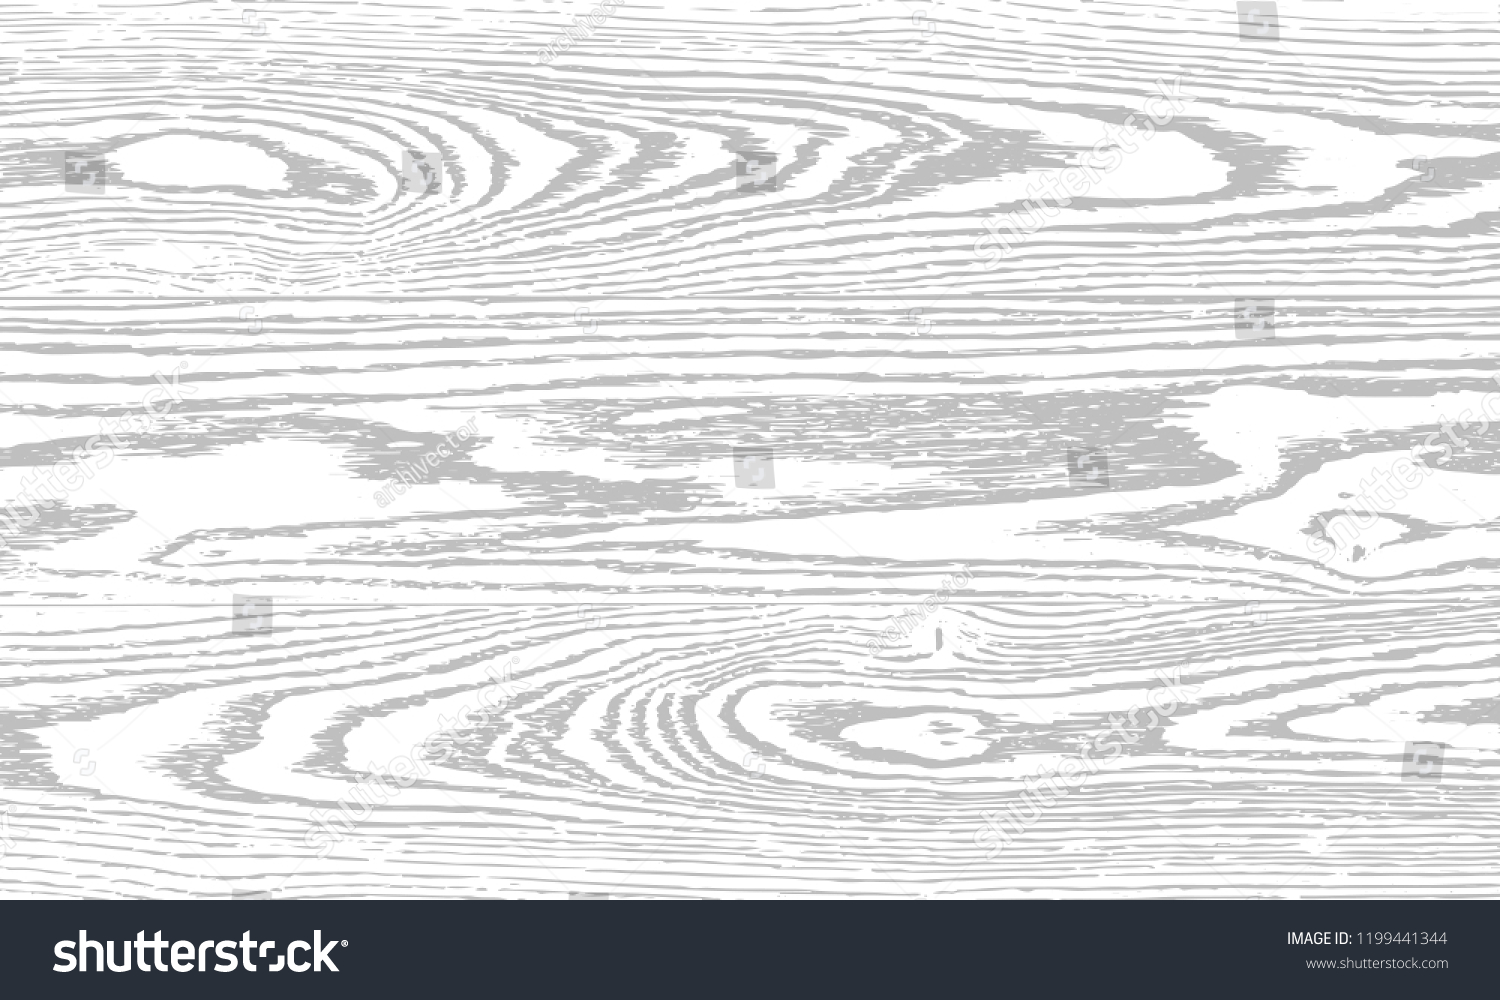 Wood texture. Dry wooden overlay texture. Design background. Vector illustration. #1199441344